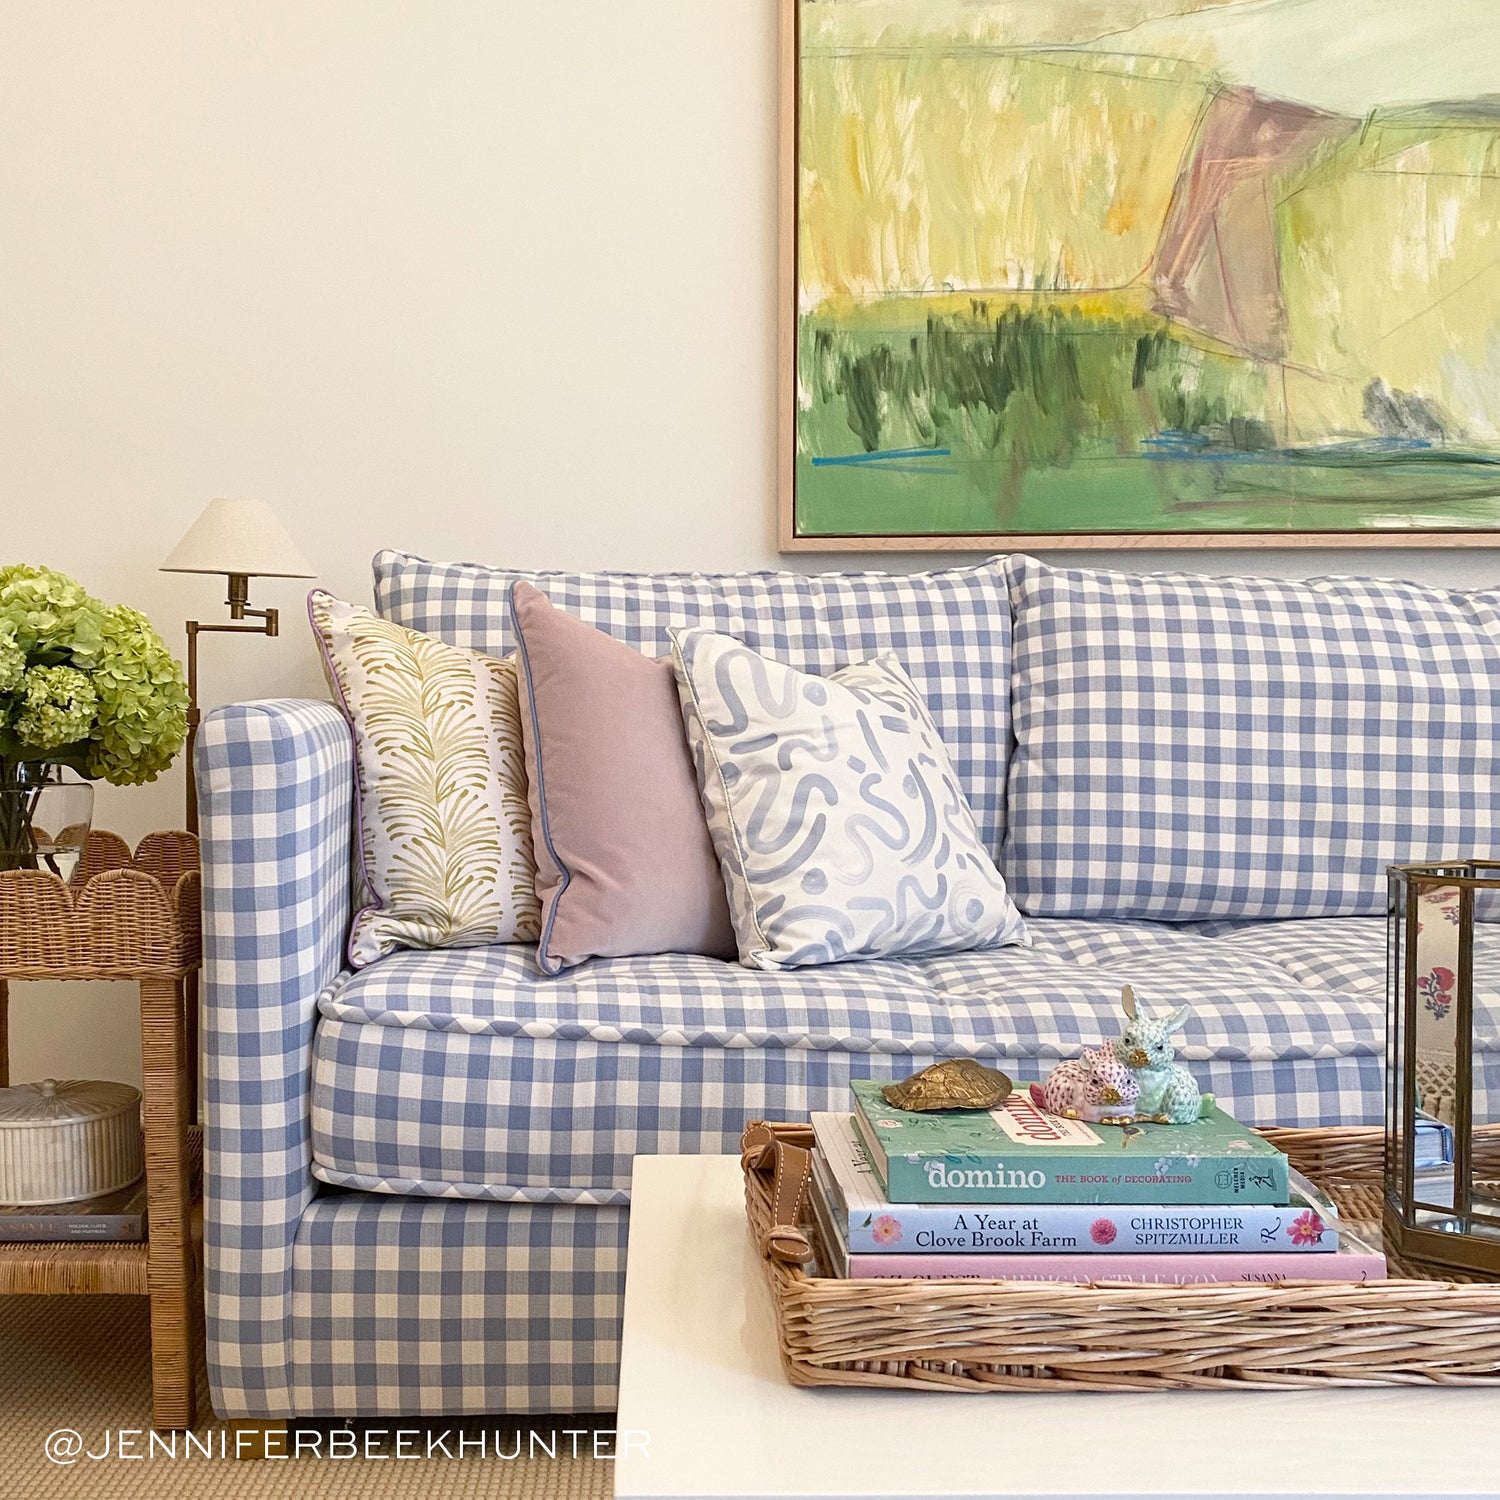 Living room styled with Yellow Stripe Chartreuse Printed pillow, pink velvet pillow, and sky blue printed pillow on blue and white couch next to white coffee table with books and decorations. Photo taken by Jennifer Hunter